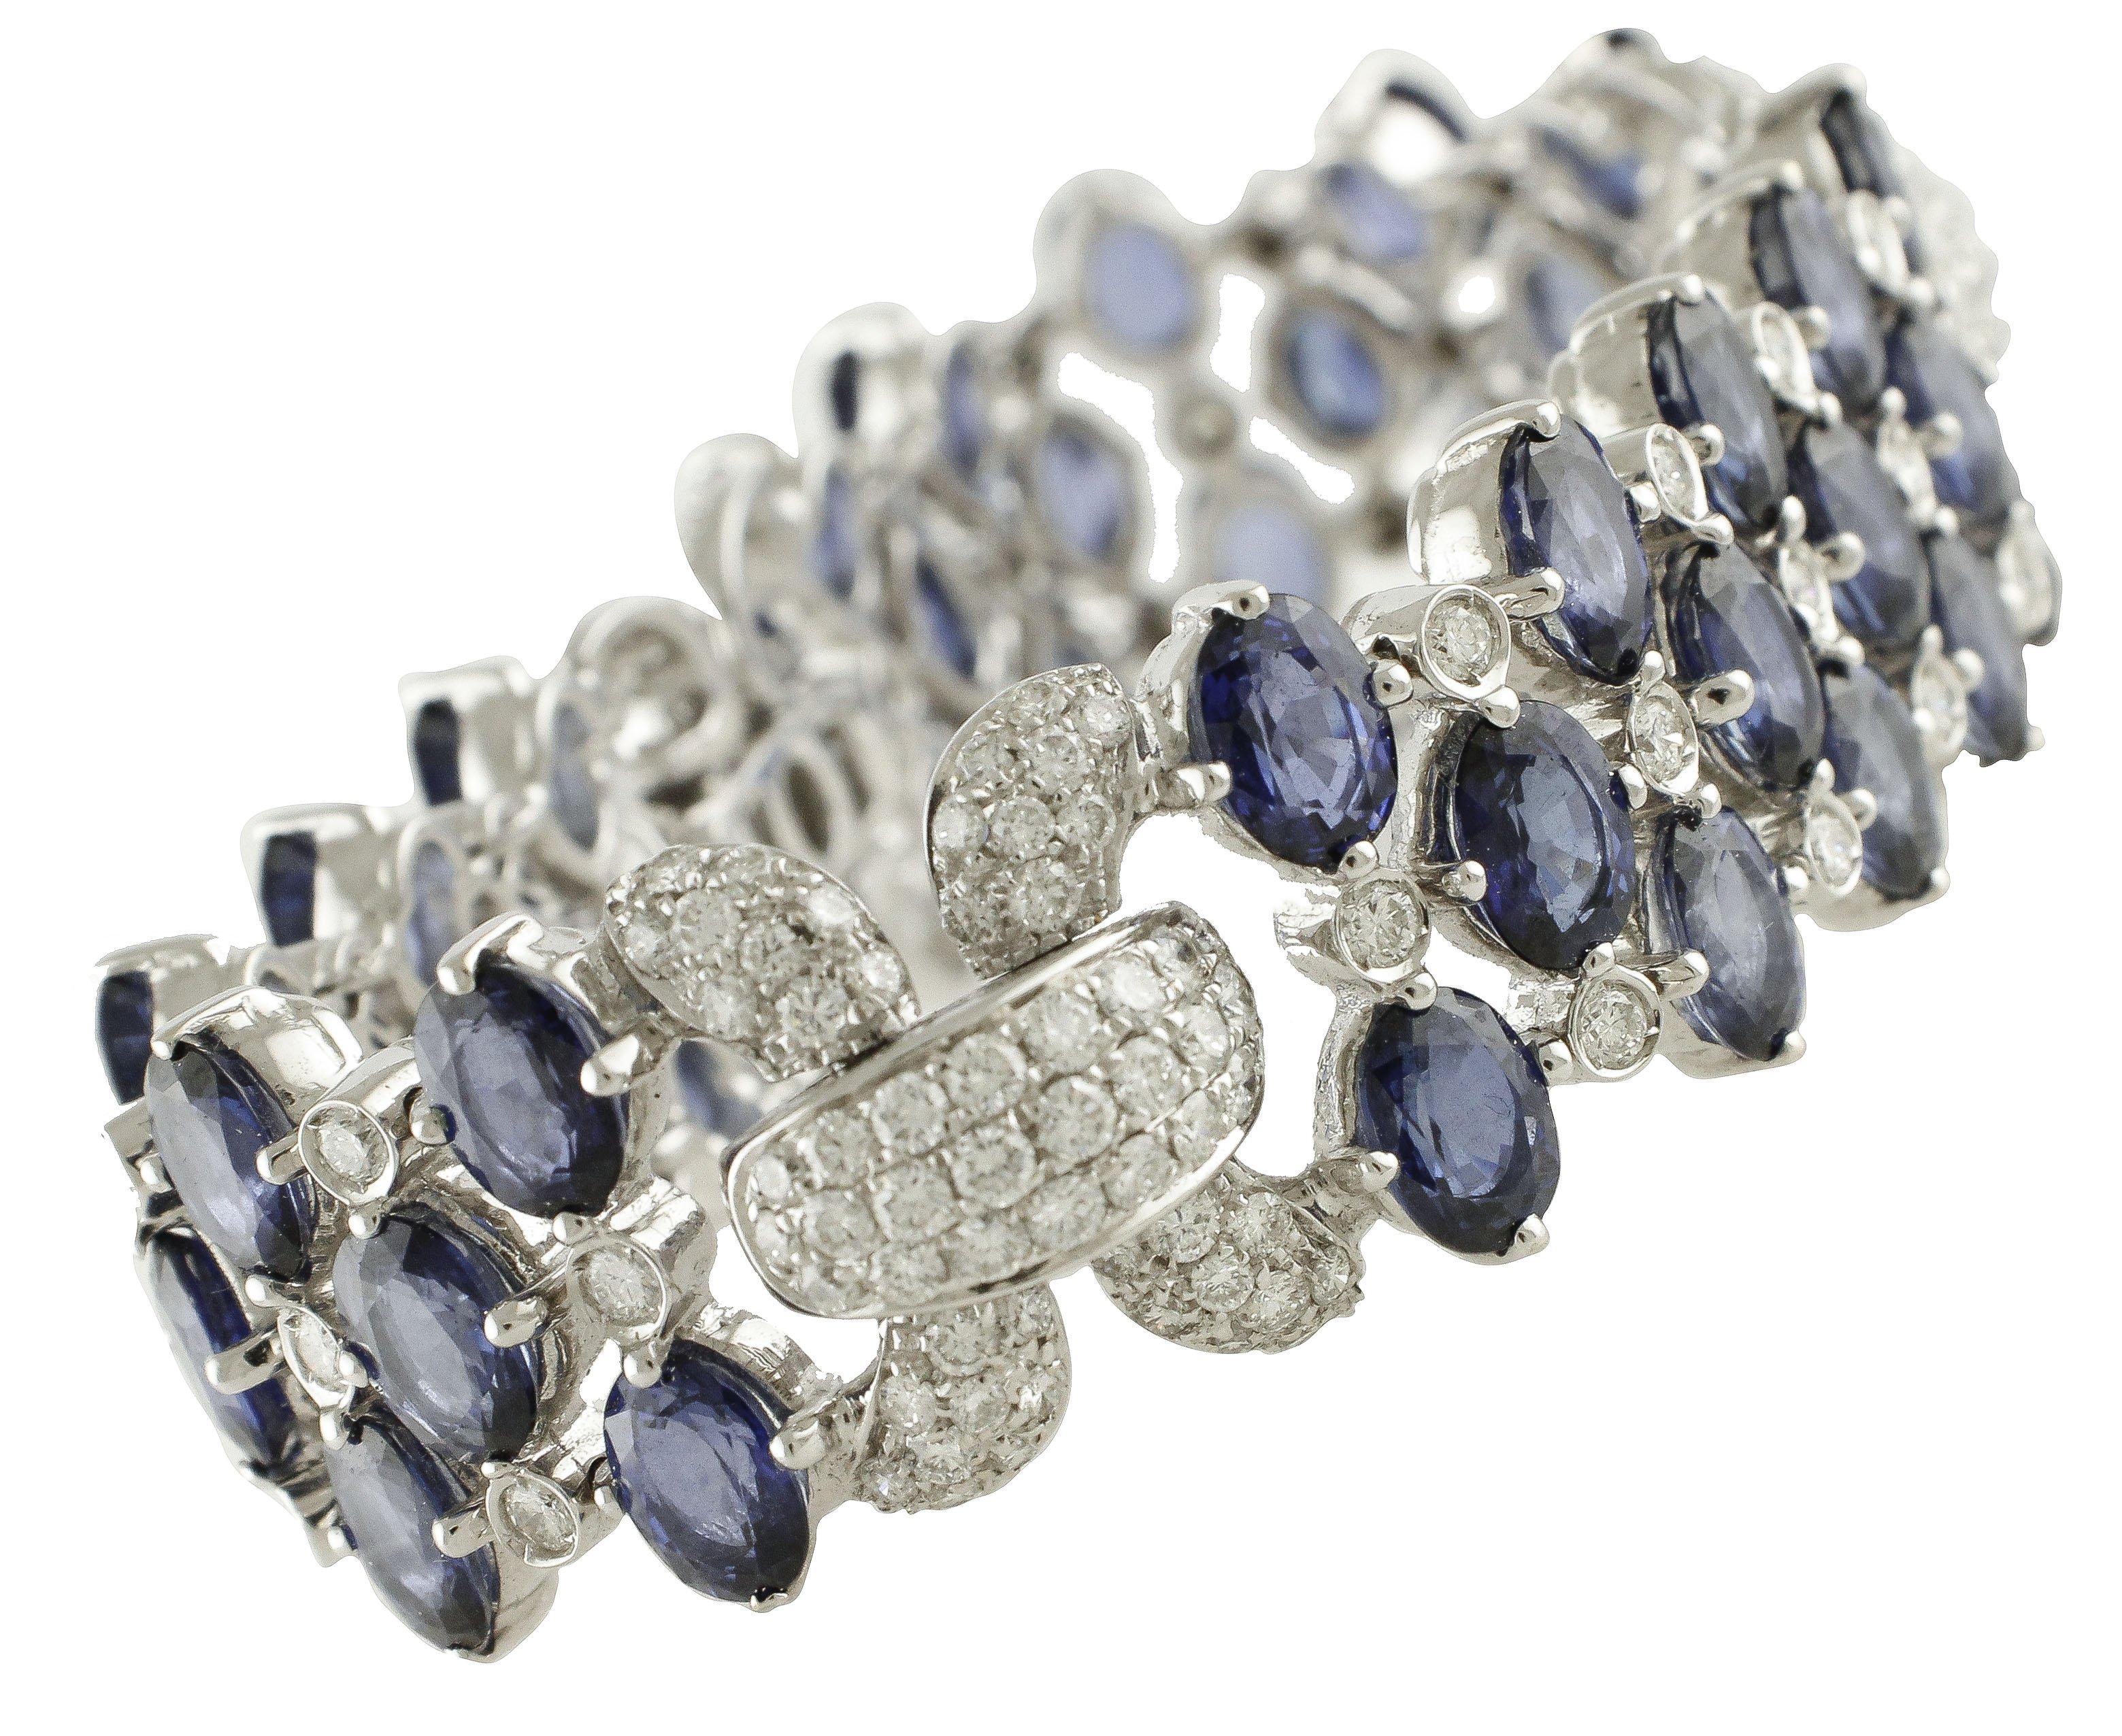 SHIPPING POLICY: 
No additional costs will be added to this order. 
Shipping costs will be totally covered by the seller (customs duties included).

Amazing link bracelet in 18K white gold mounted with 5.31 ct of shining white diamonds and 35.70 ct